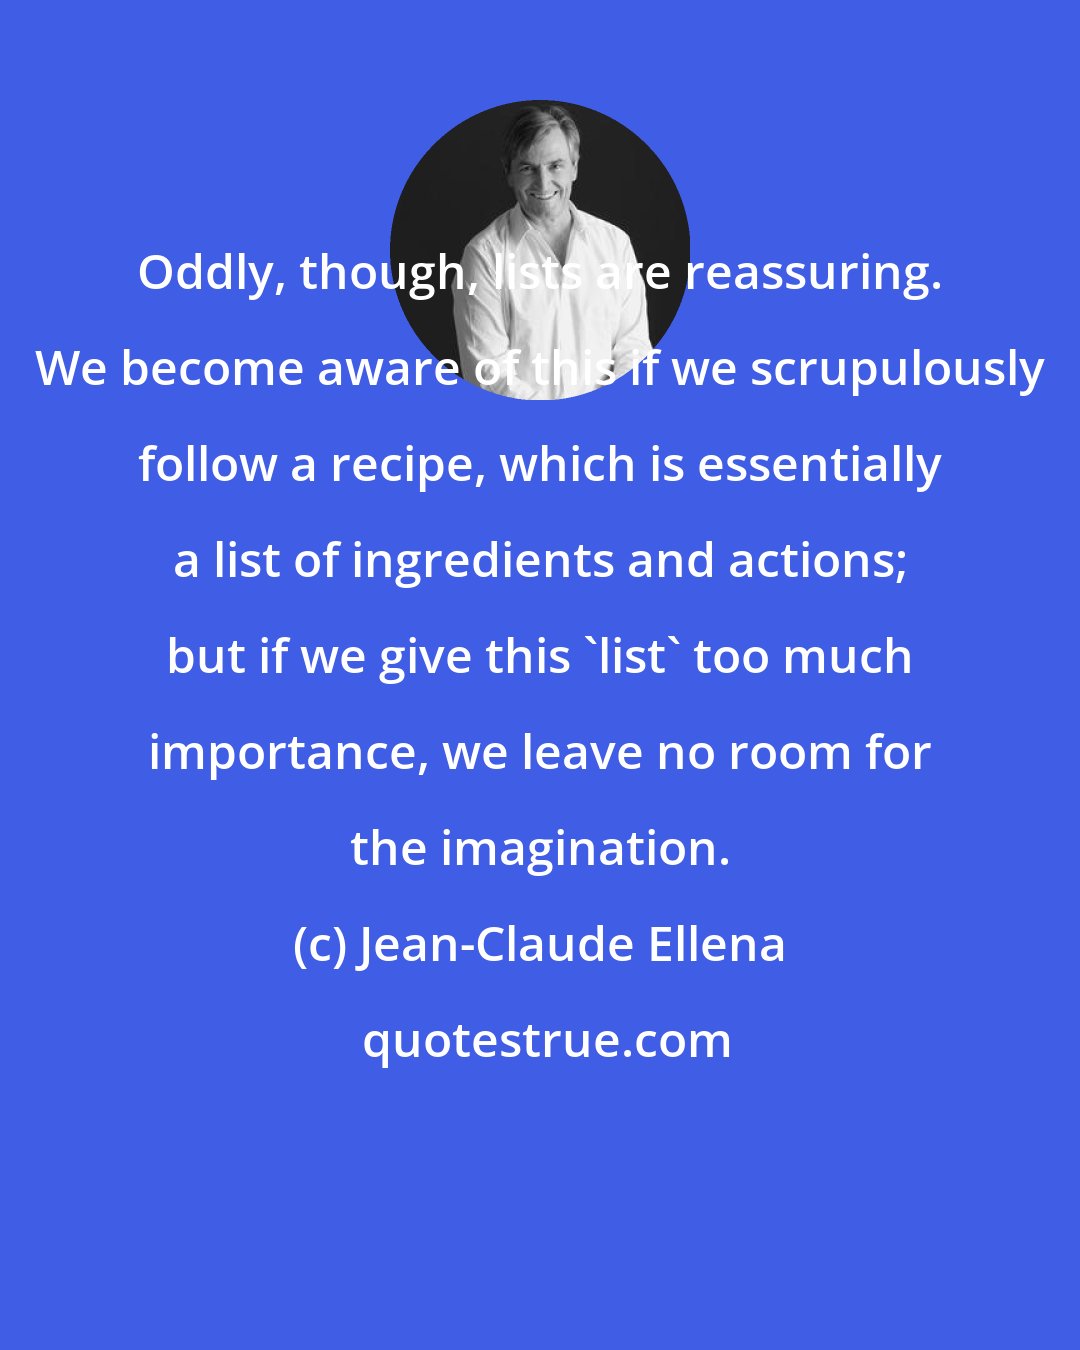 Jean-Claude Ellena: Oddly, though, lists are reassuring. We become aware of this if we scrupulously follow a recipe, which is essentially a list of ingredients and actions; but if we give this 'list' too much importance, we leave no room for the imagination.